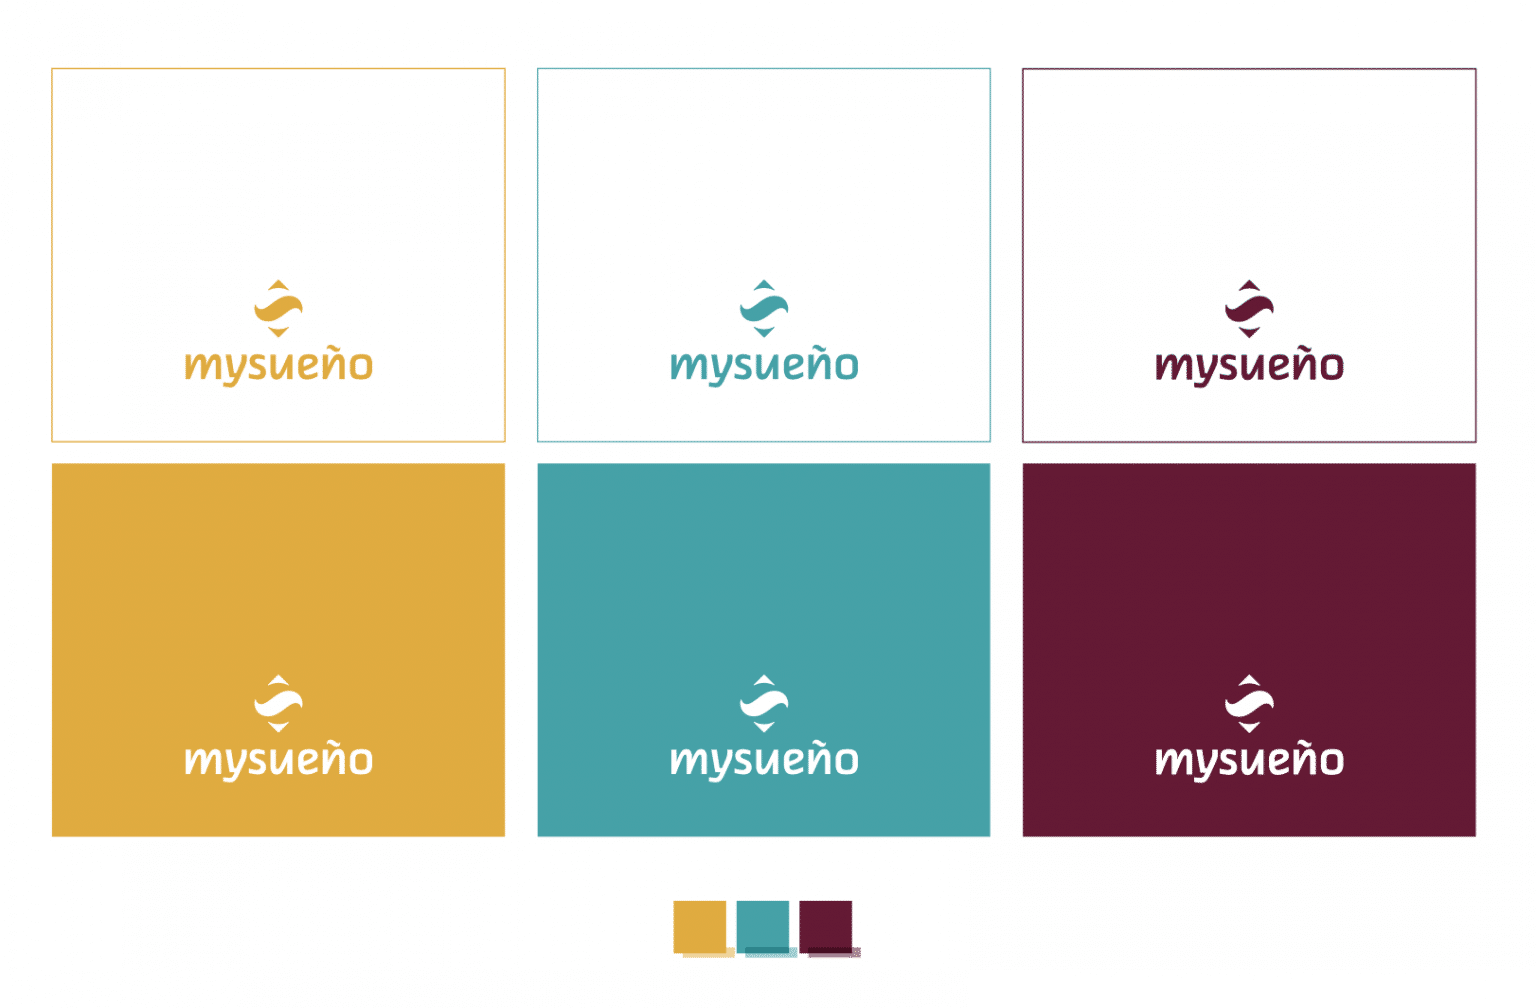 Sports branding process step 4 - Font selection & brand colors.